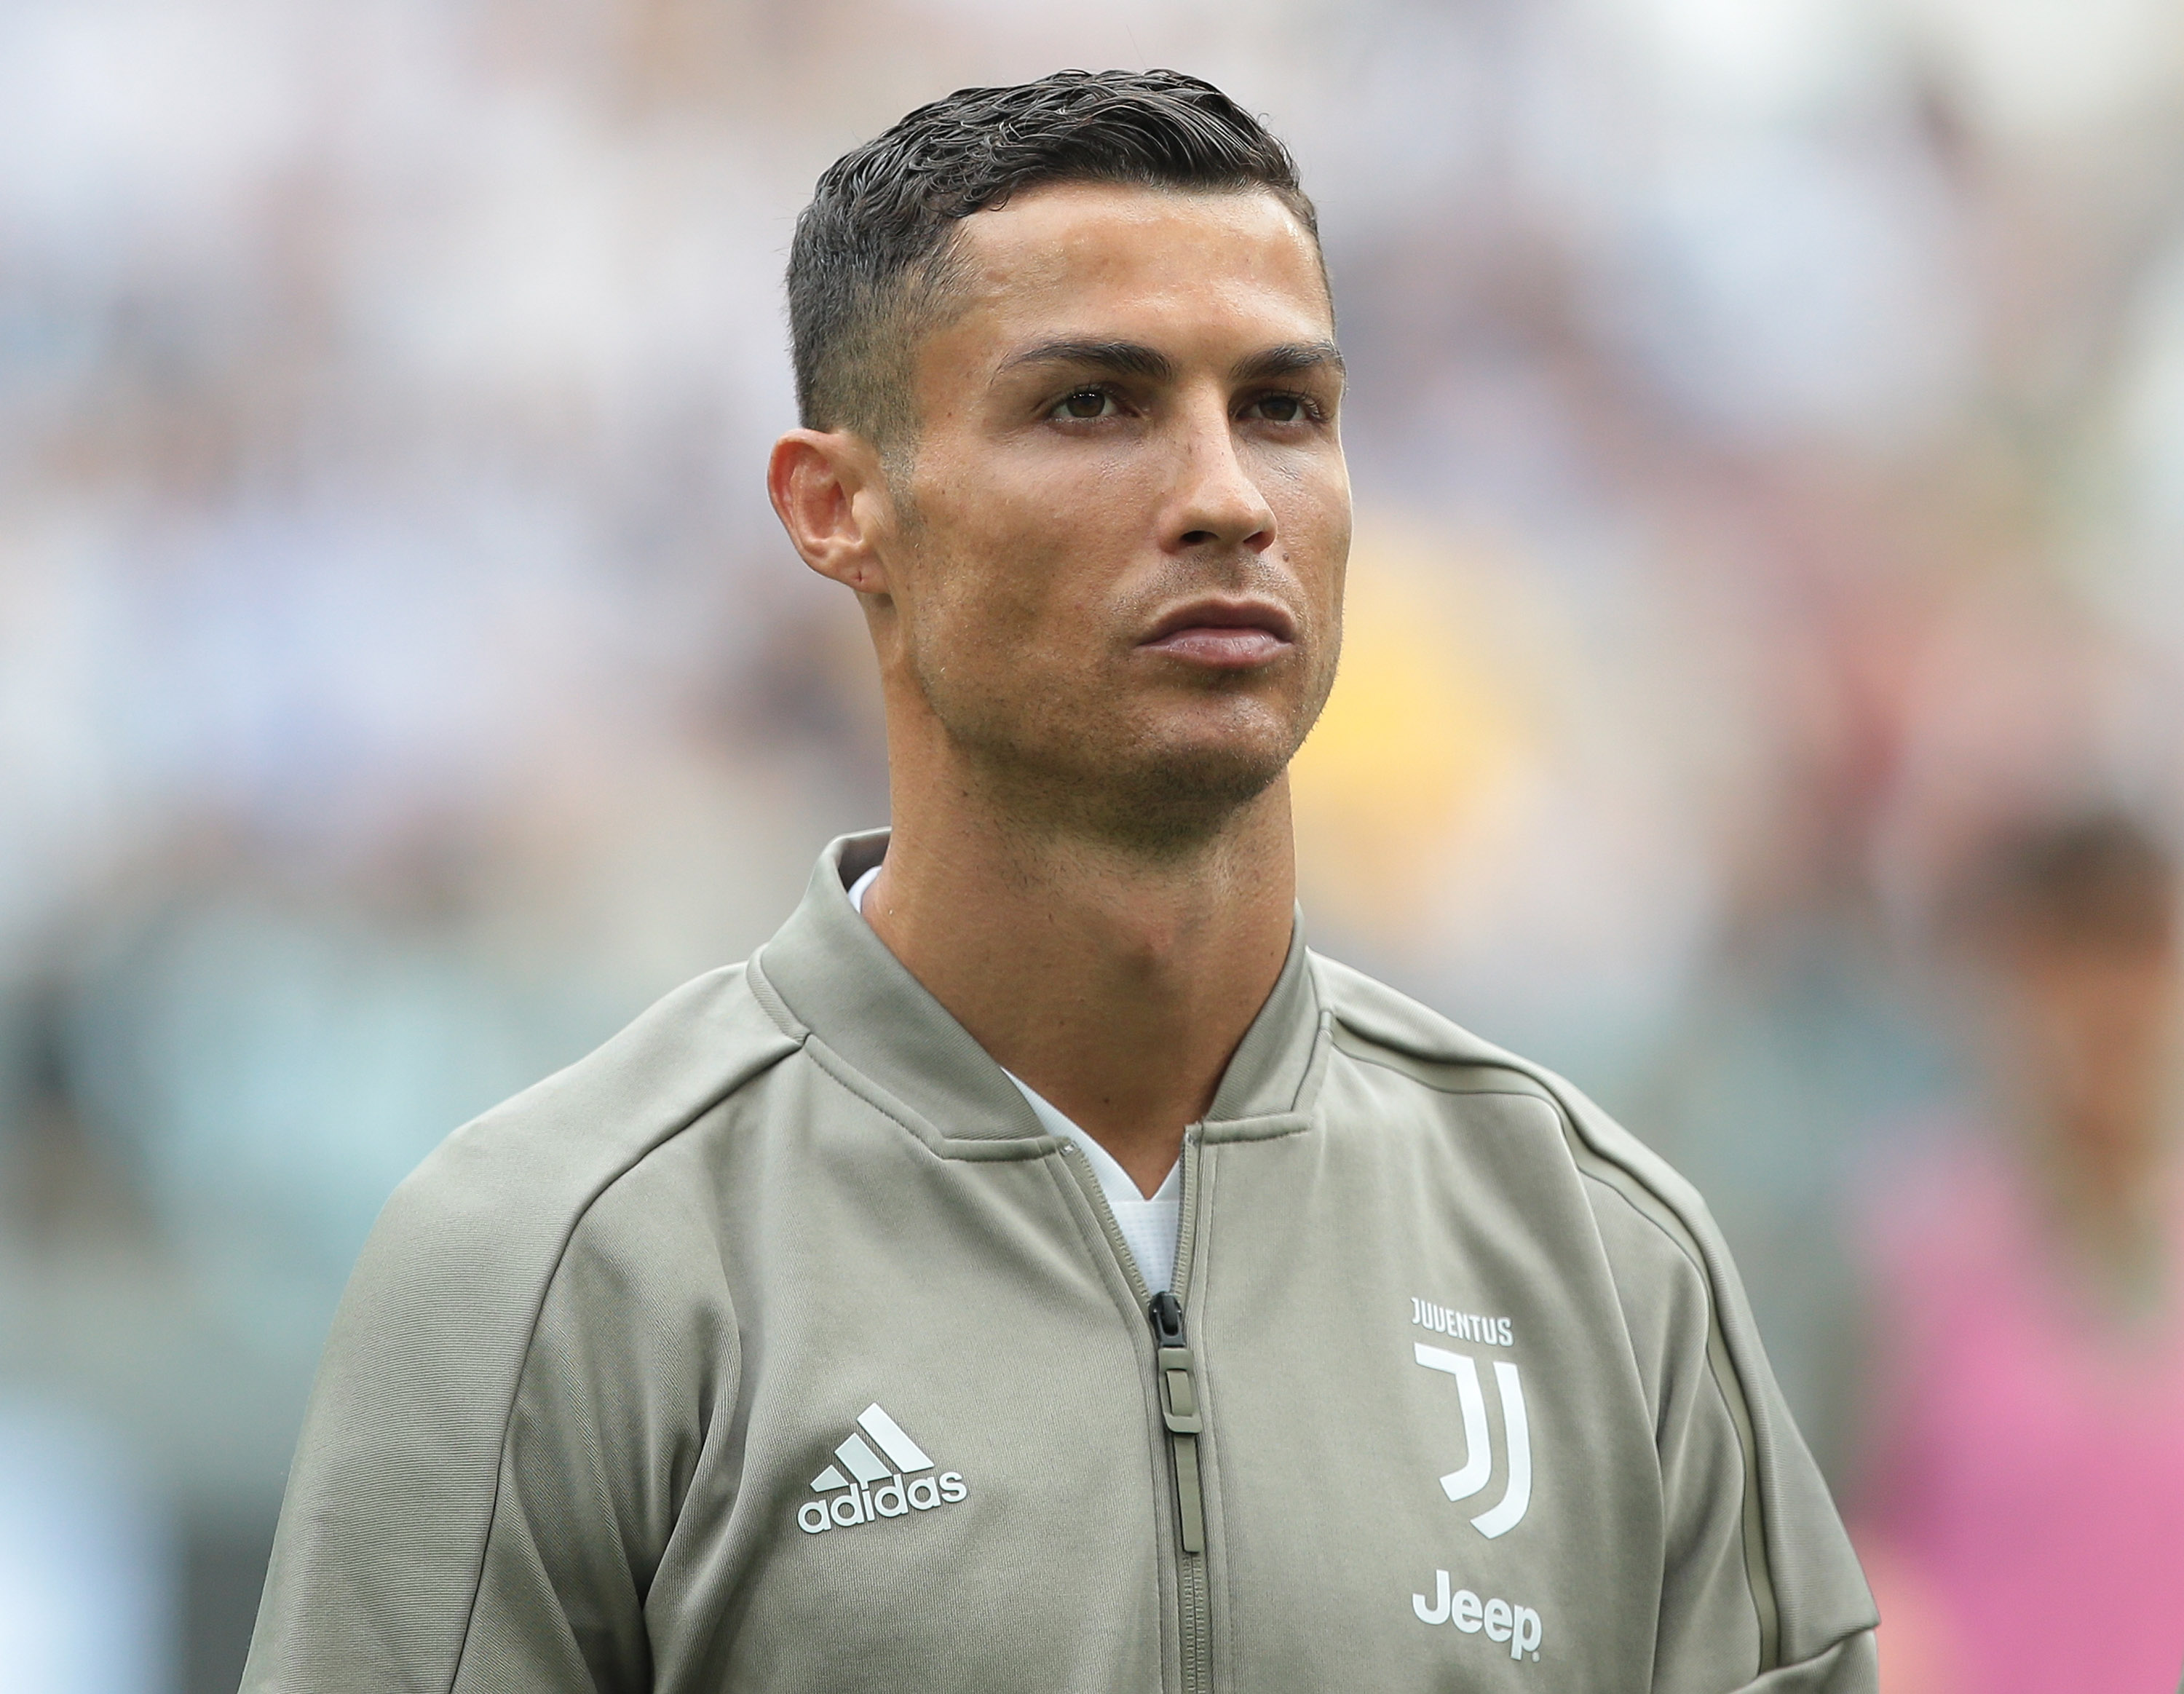 TURIN, ITALY - SEPTEMBER 16:  Cristiano Ronaldo of Juventus FC looks on prior to the serie A match between Juventus and US Sassuolo at Allianz Stadium on September 16, 2018 in Turin, Italy.  (Photo by Emilio Andreoli/Getty Images)